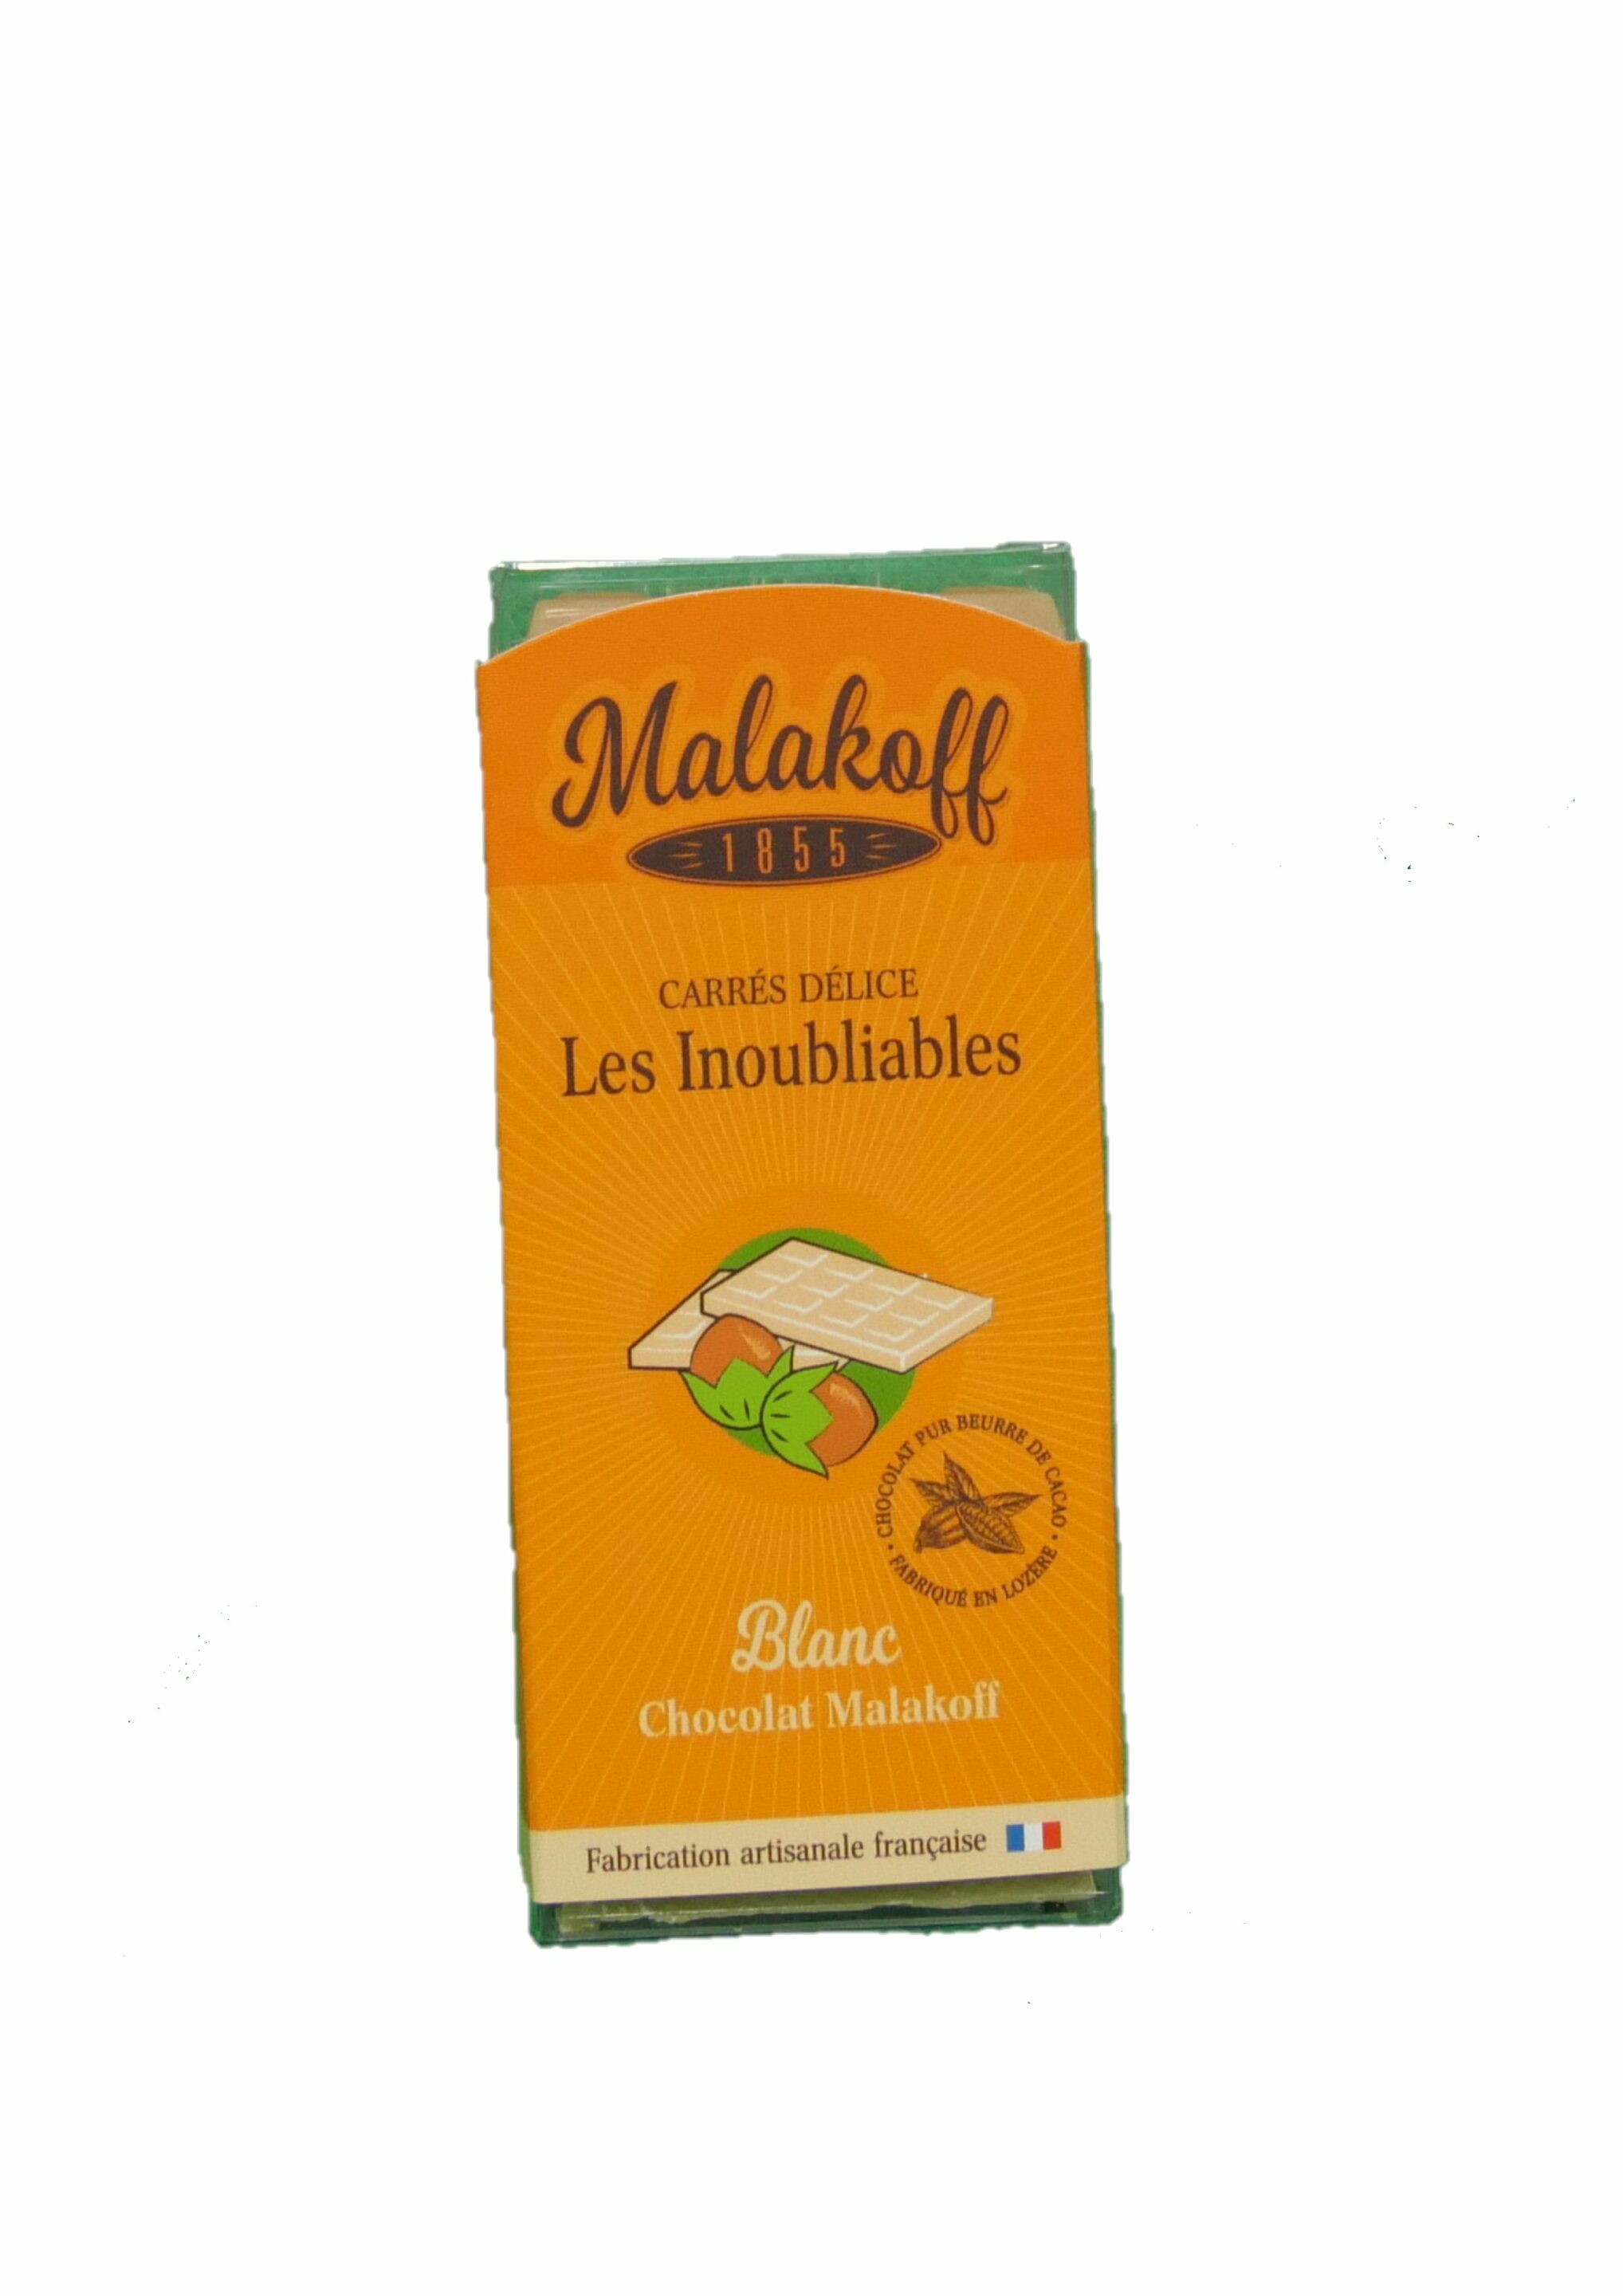 21 CARRES DELICES CHOCOLAT MALAKOFF BLANC, 105GR